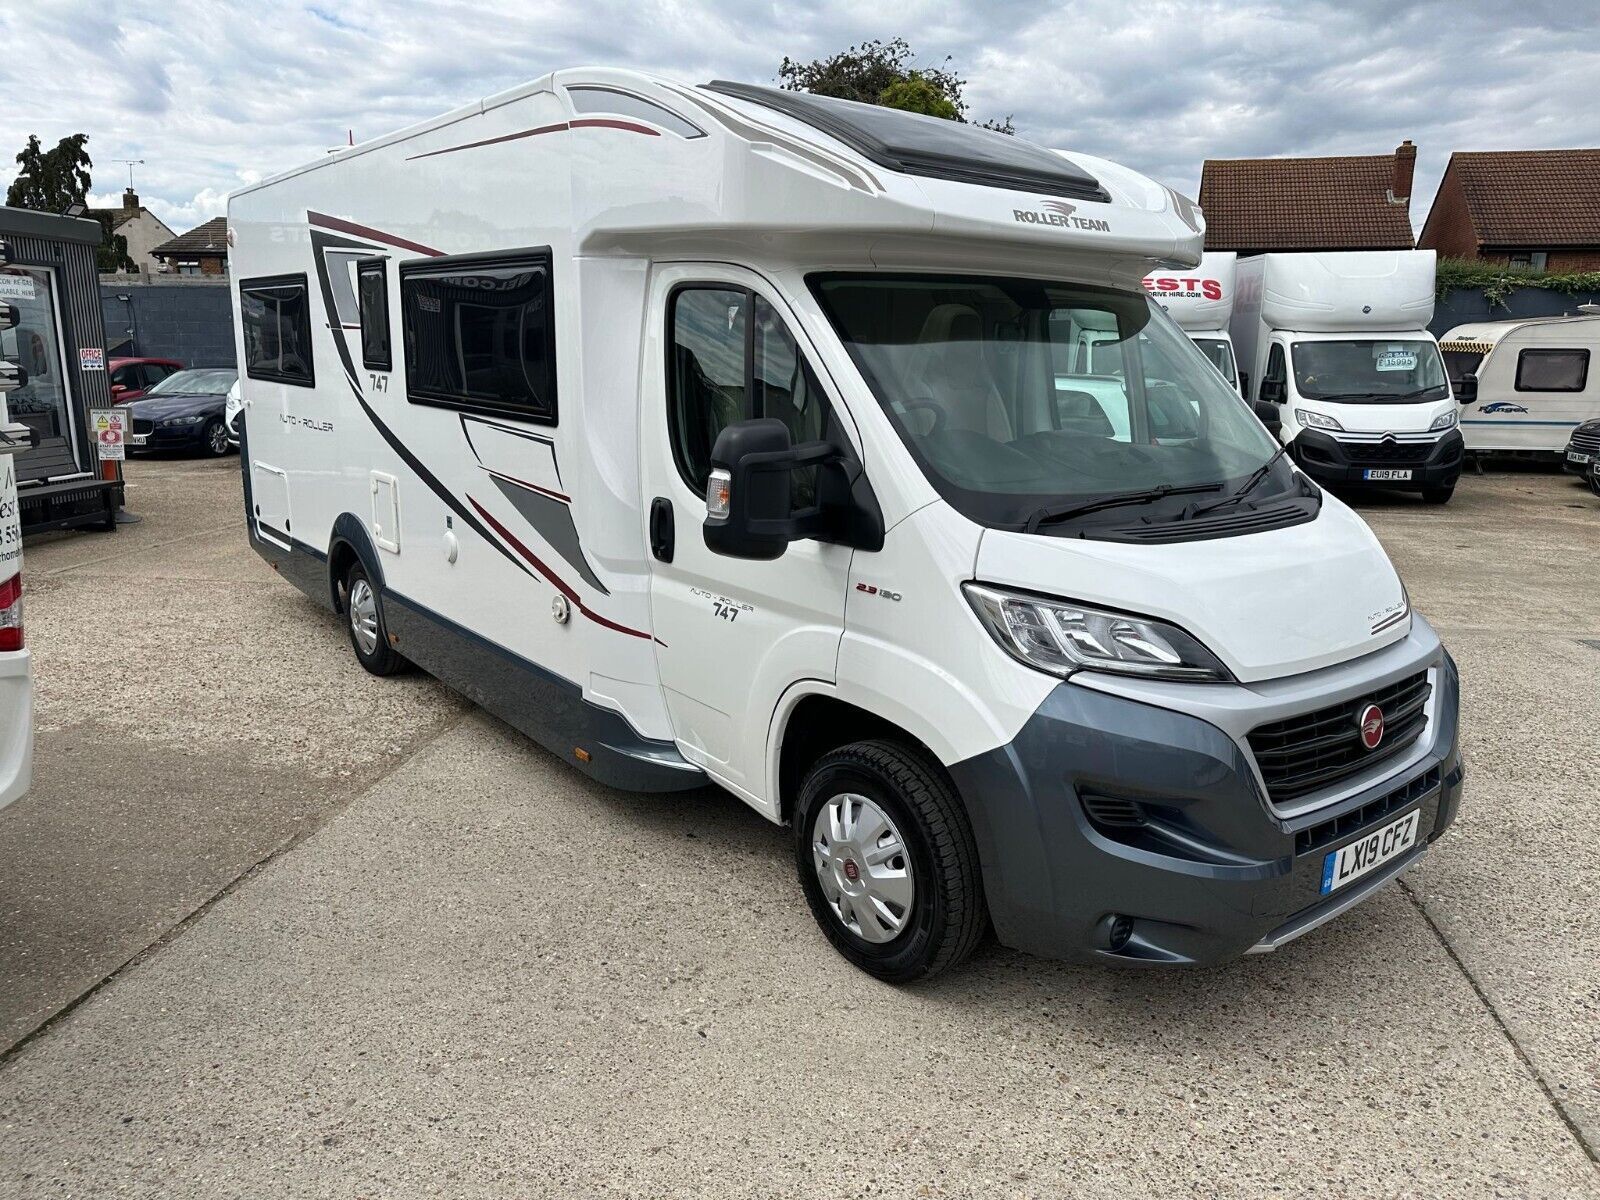 used, second-hand, automatic, 6 berth motor home for sale, london, essex kent, buy